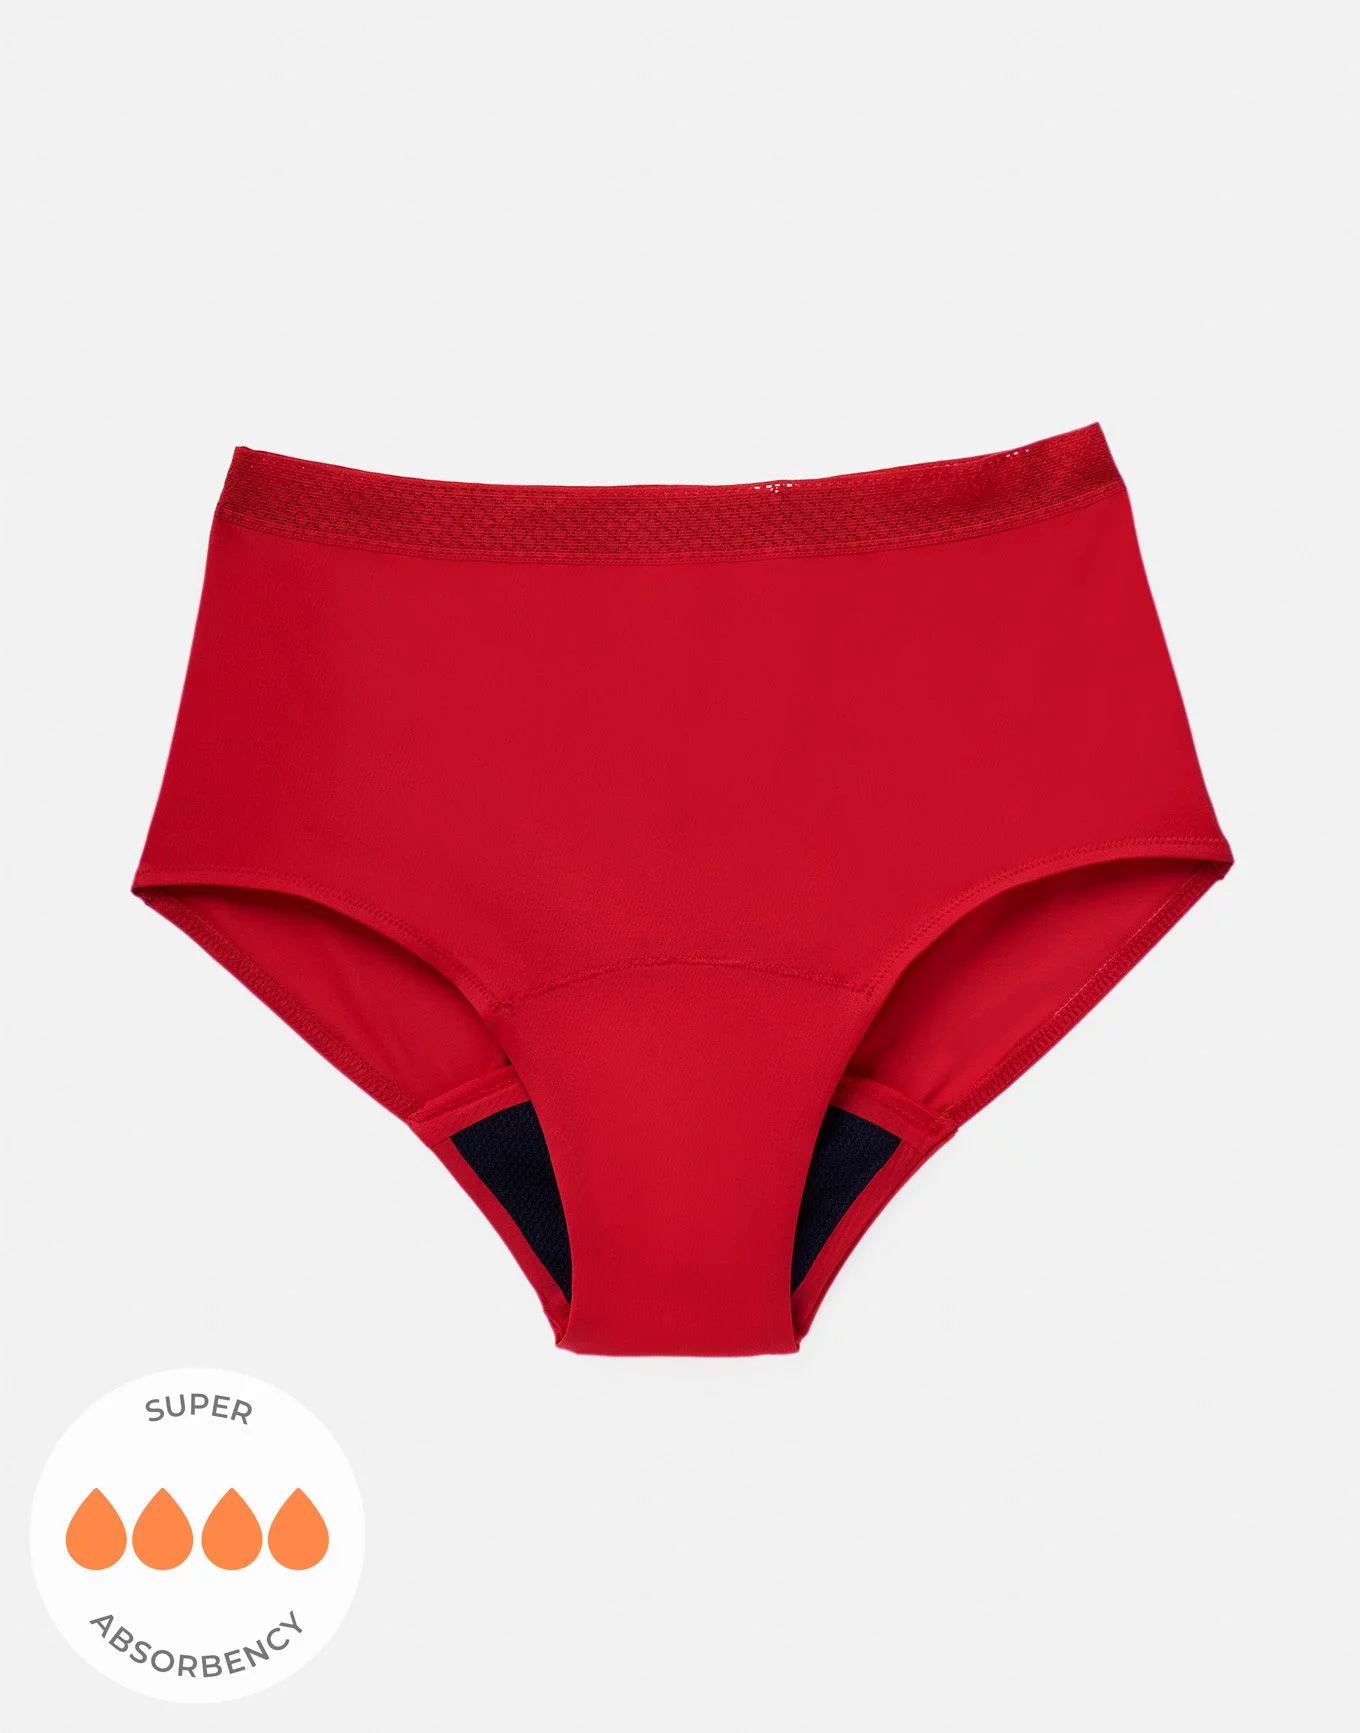 New year, new red underwear! Here's a big list of bright red